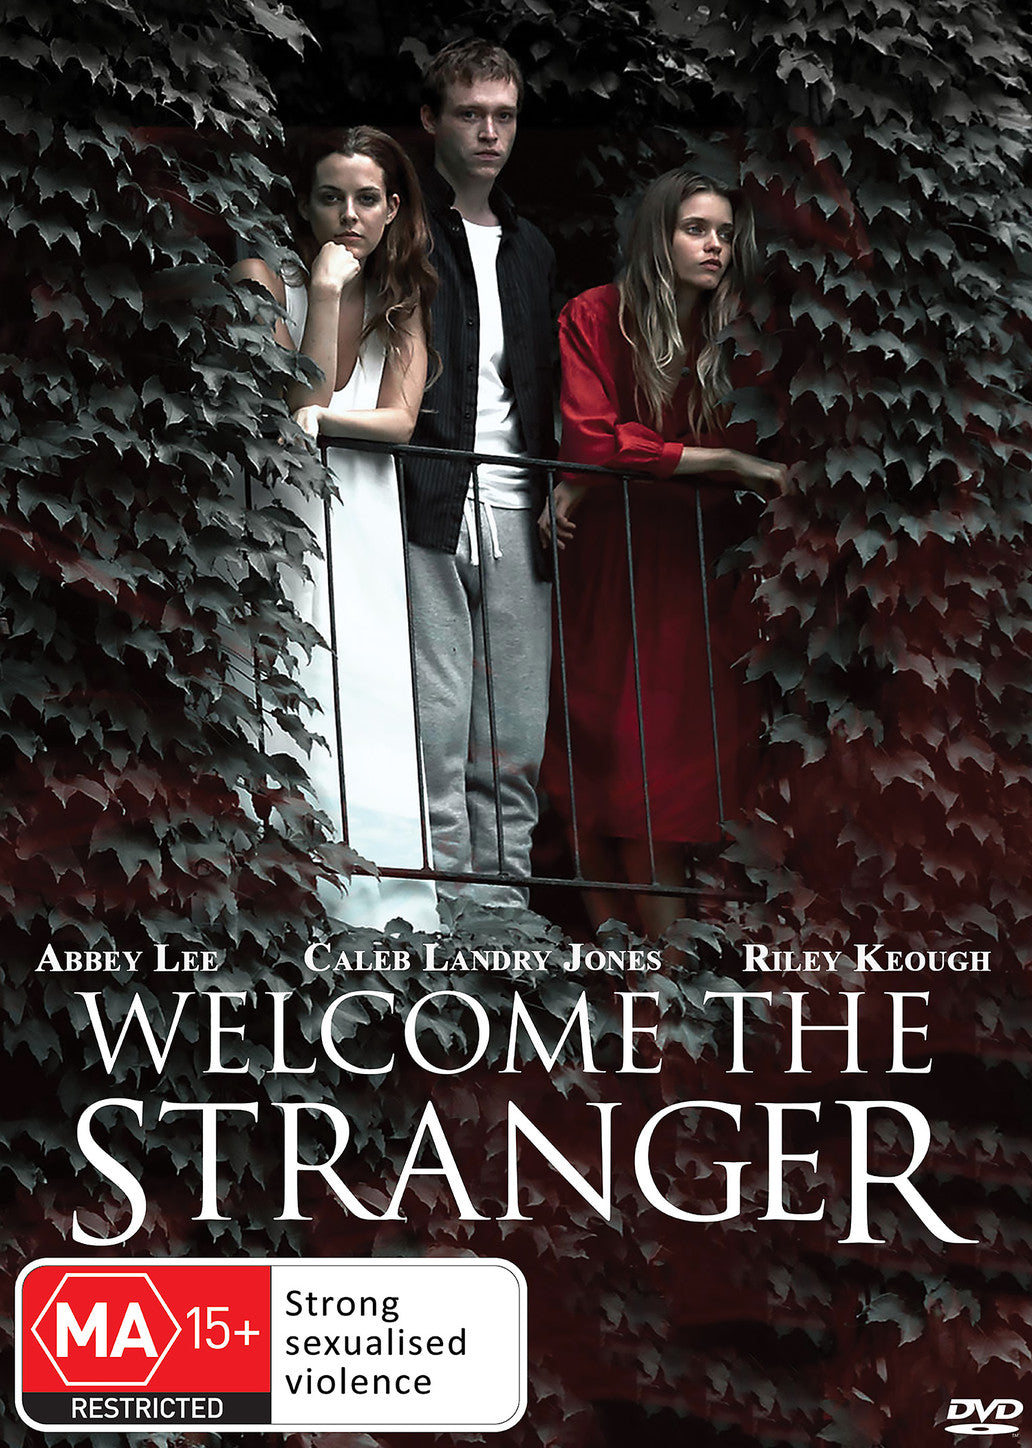 WELCOME THE STRANGER